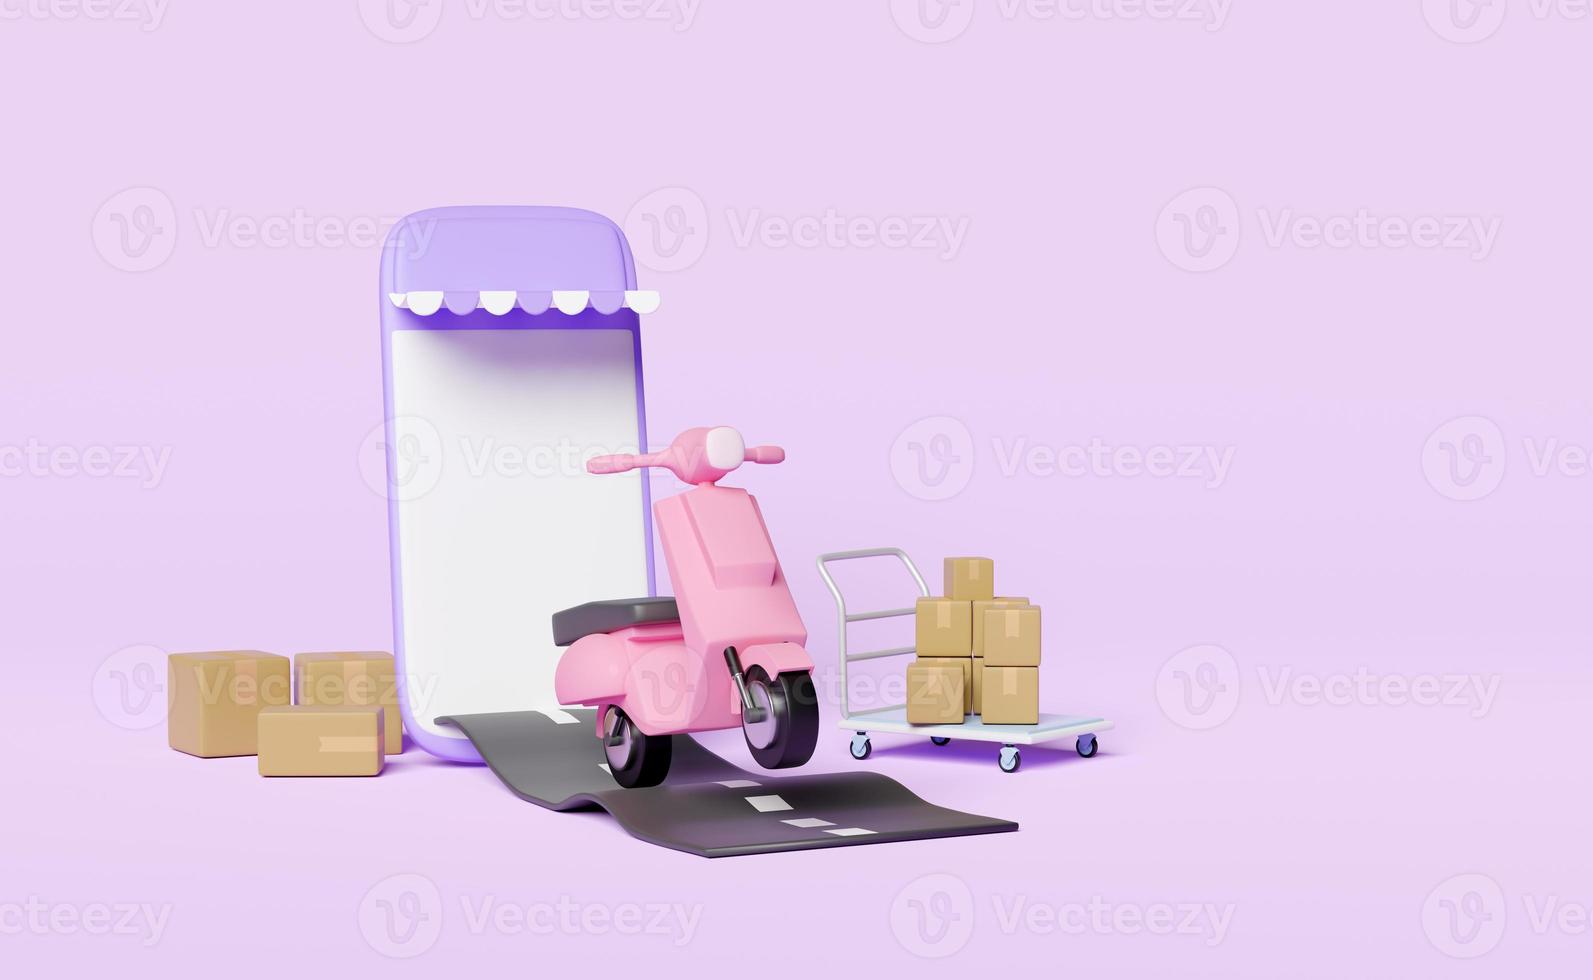 3d scooter on street with open goods cardboard box, mobile phone, smartphone, platform trolley isolated on pink background. fast delivery concept, 3d render illustration photo